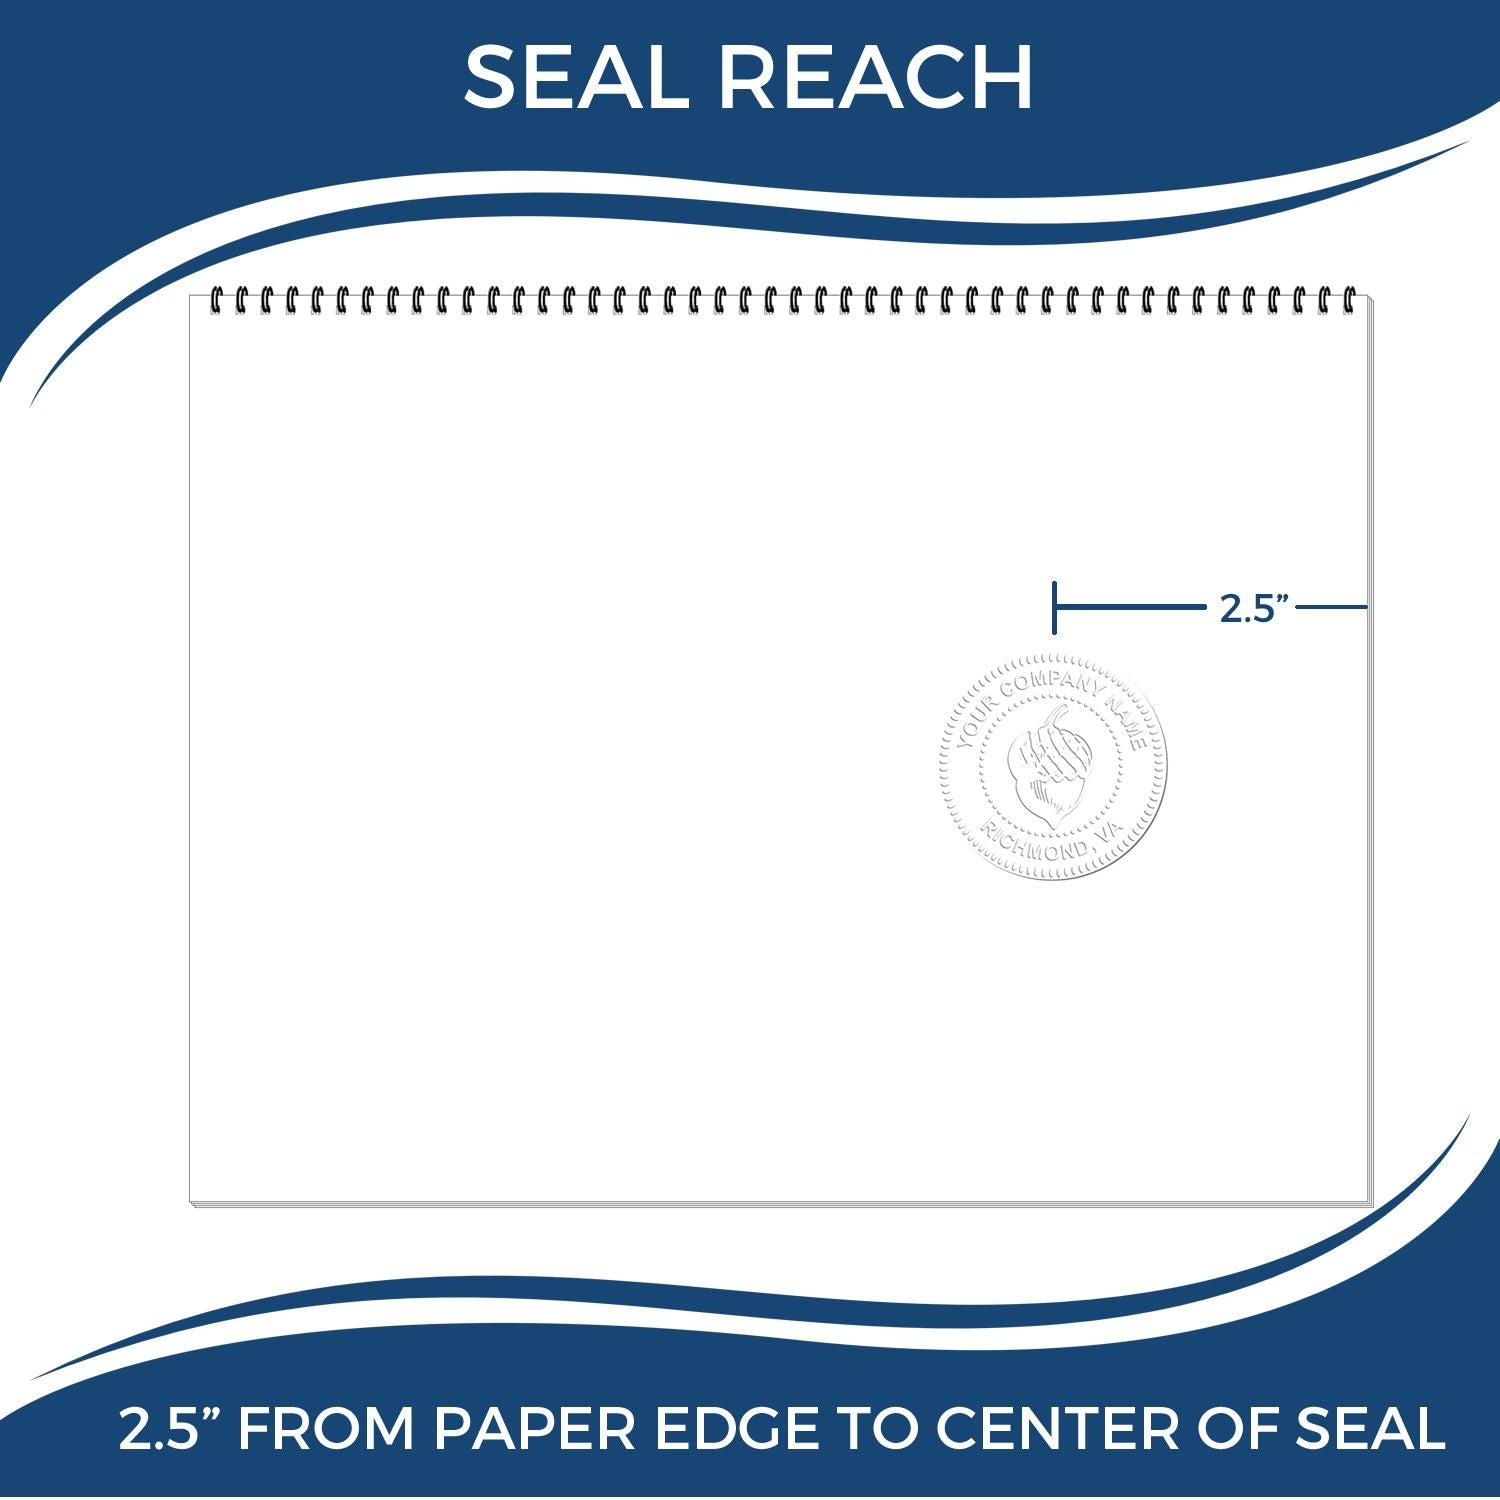 An infographic showing the seal reach which is represented by a ruler and a miniature seal image of the Heavy Duty Cast Iron North Dakota Geologist Seal Embosser